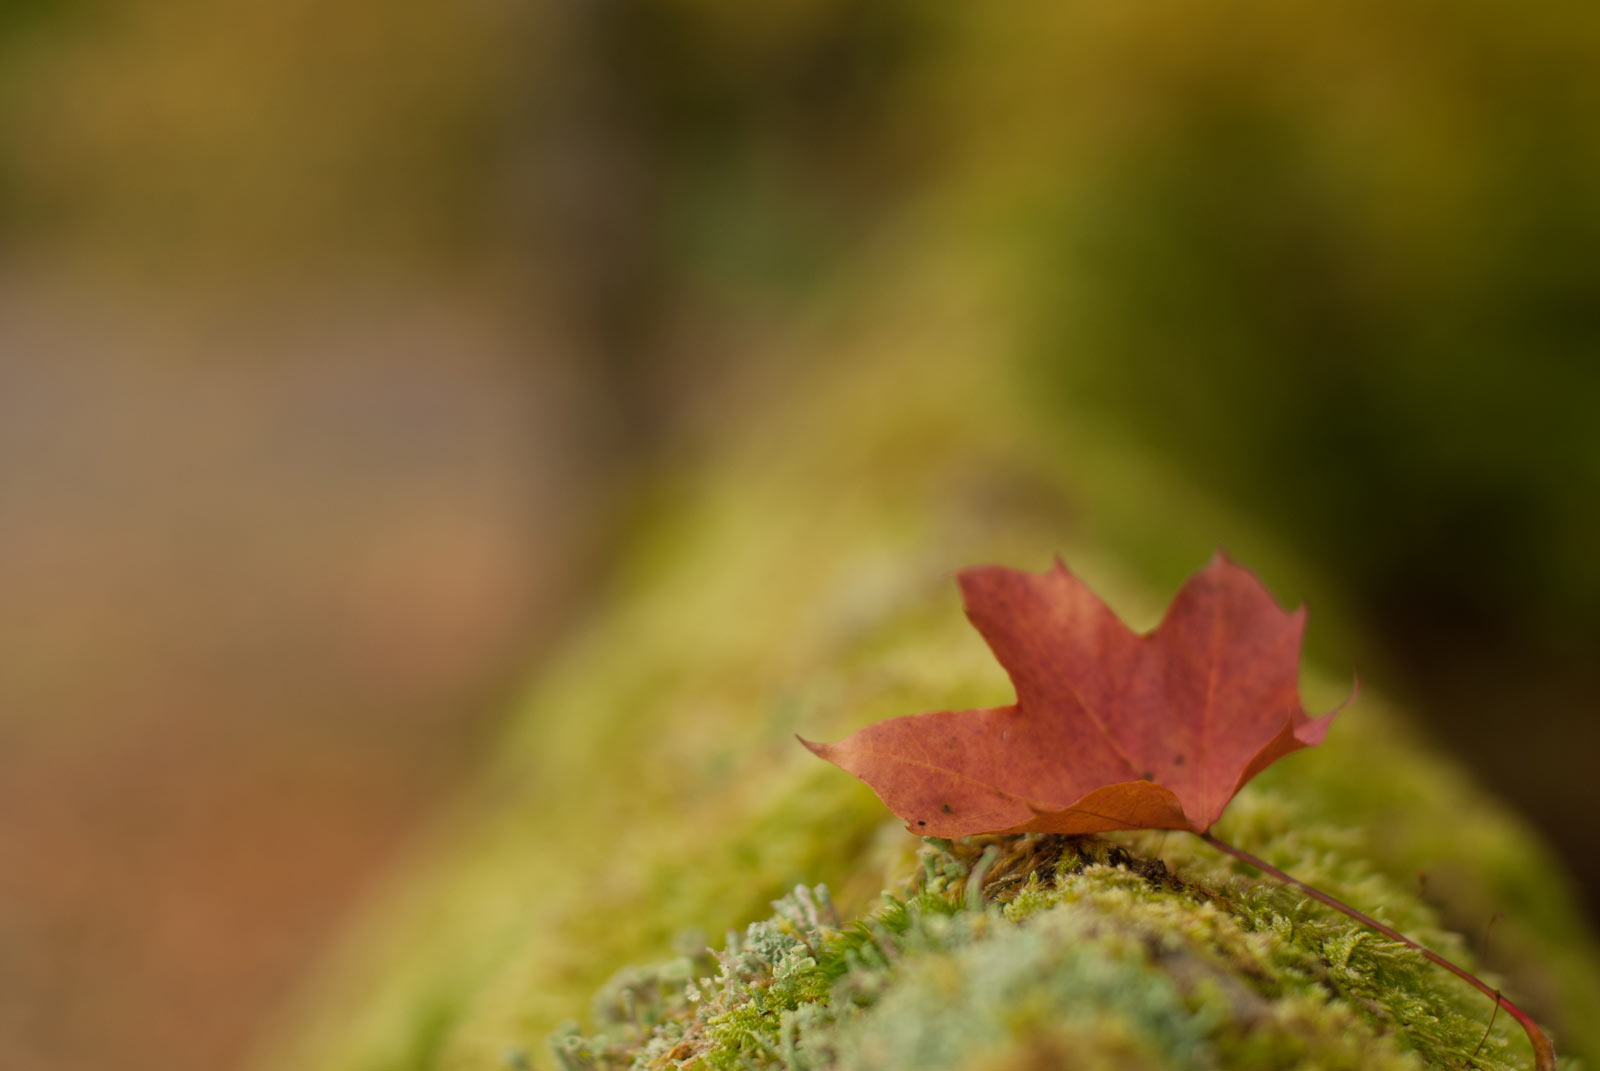 A fallen leaf perched on top of a mossy wall.